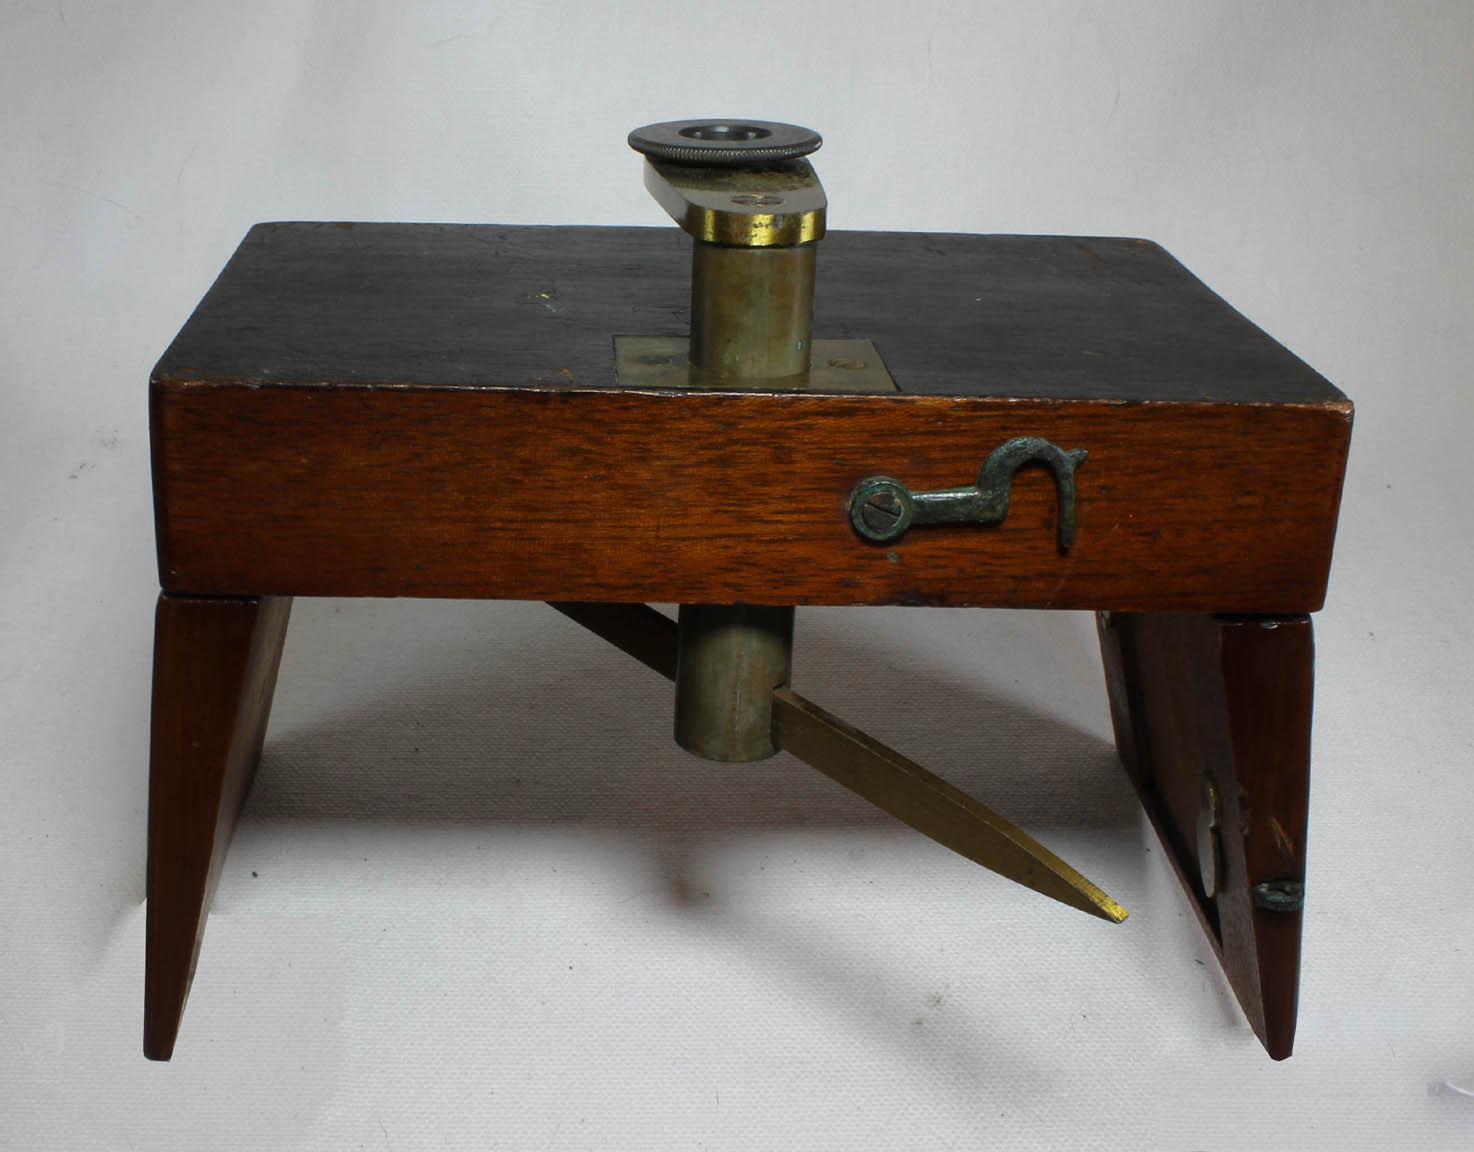 Queckett Dissecting Microscope, early form